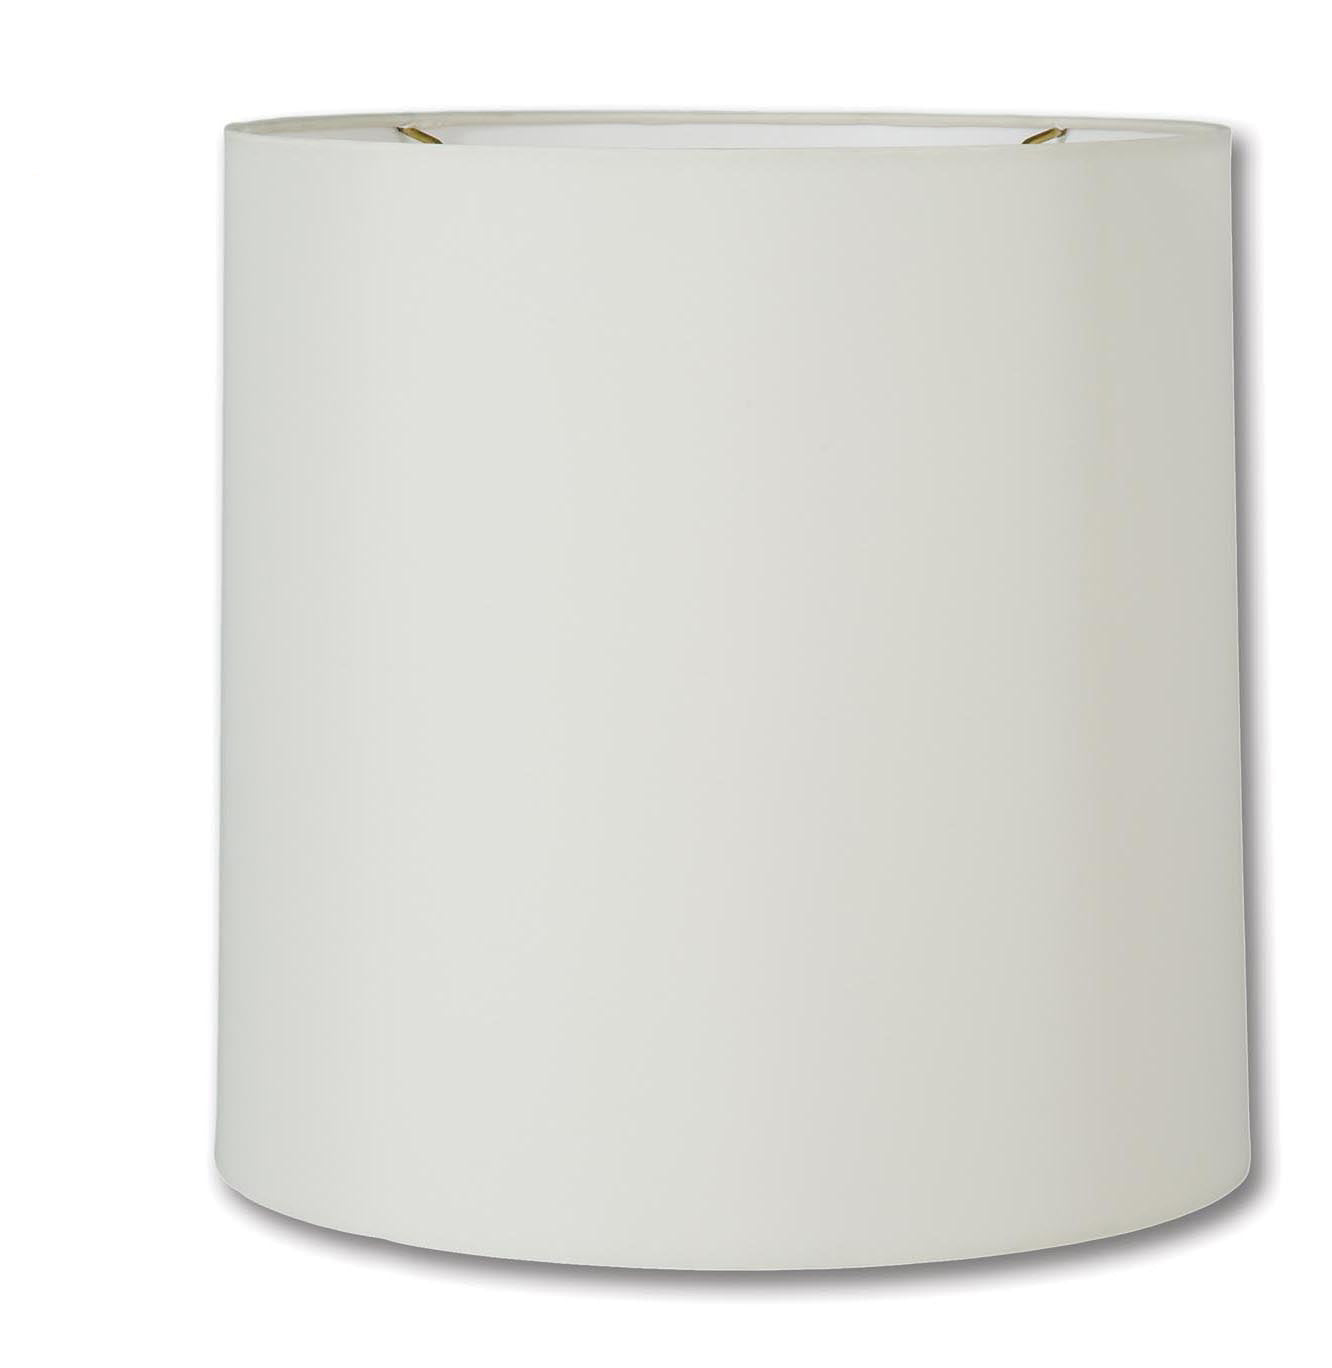 Deep Drum Hardback Lamp Shades - Ivory Color, Microfiber Chiffon Material, Brass Plated Washer Fitter